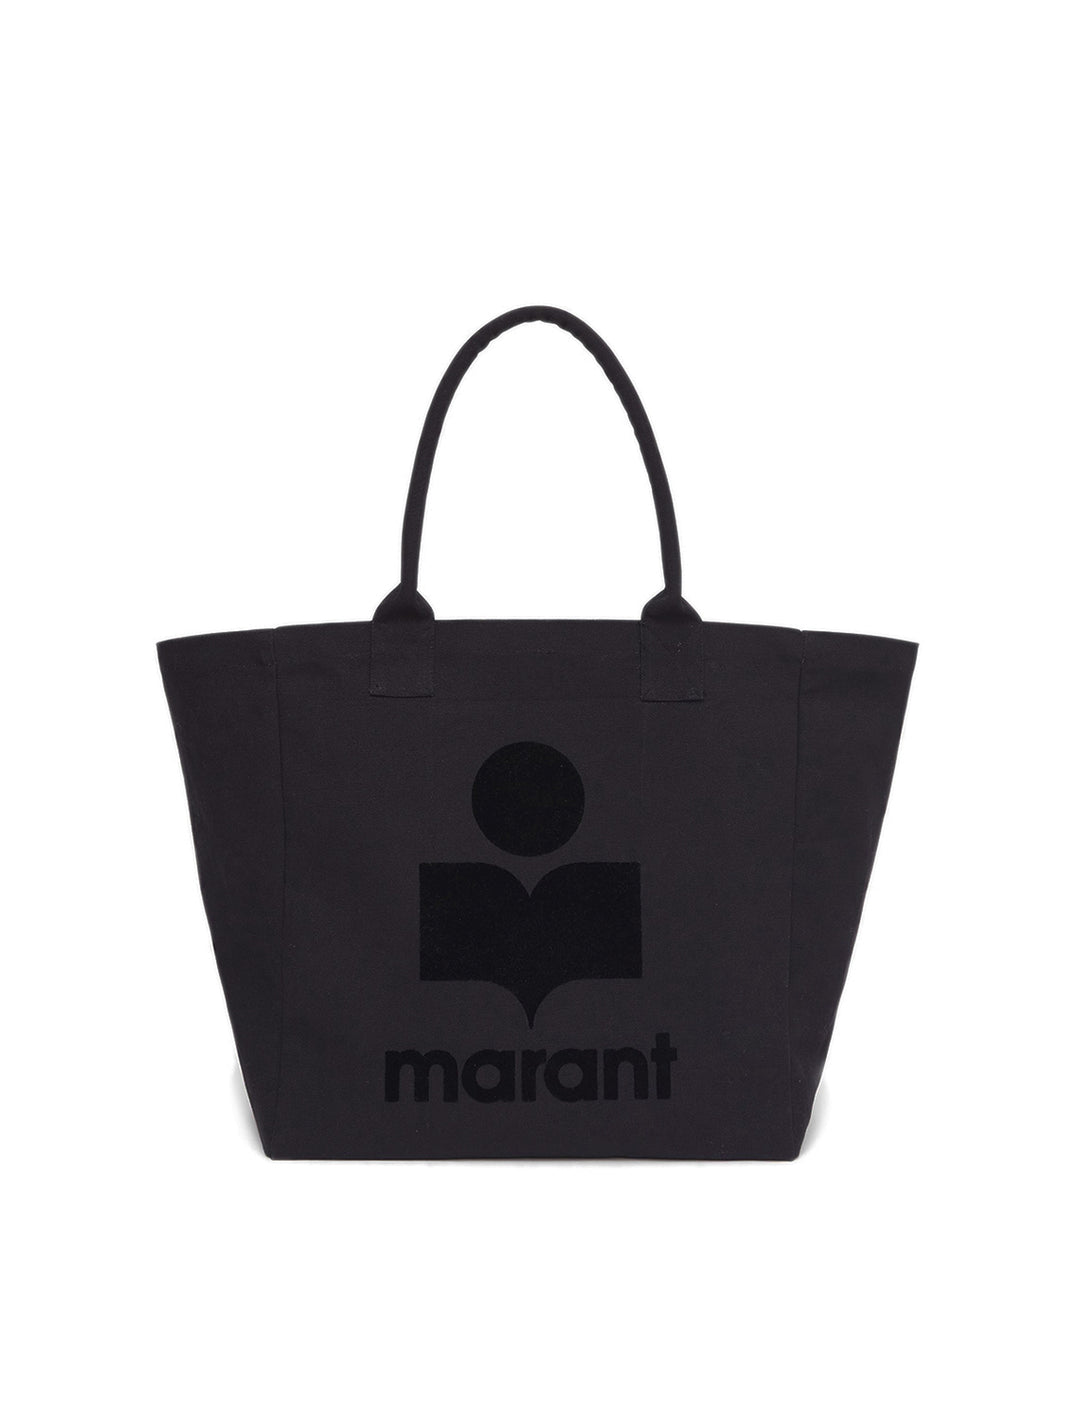 Front view of Isabel Marant Etoile's yenky zipped tote in black.